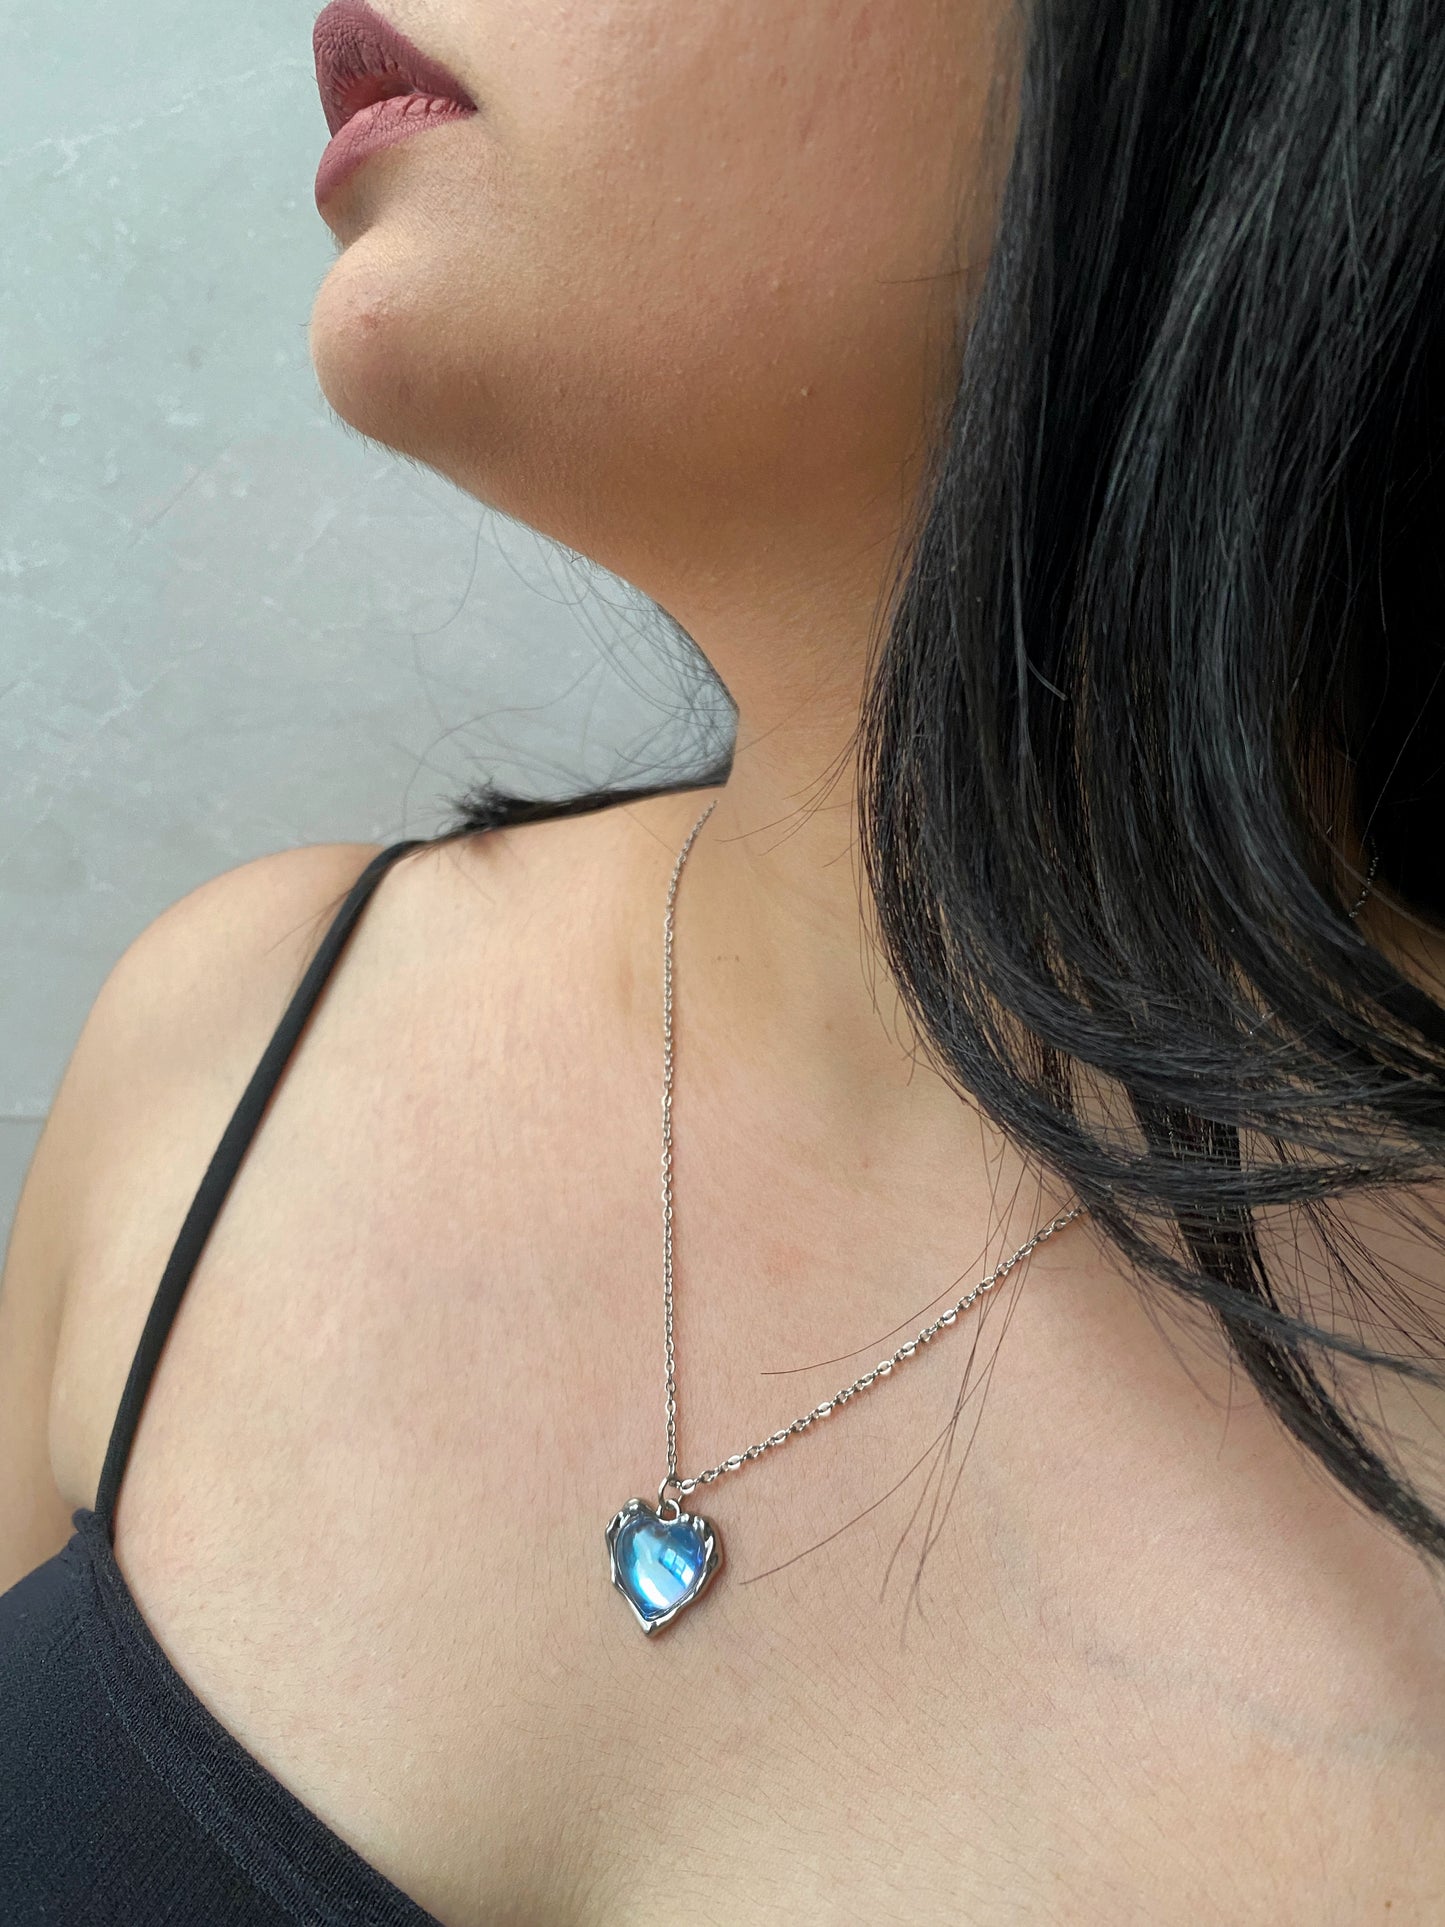 HOLOGRAPHIC MIRRORY HEART NECKLACE WITH SILVER CHAIN